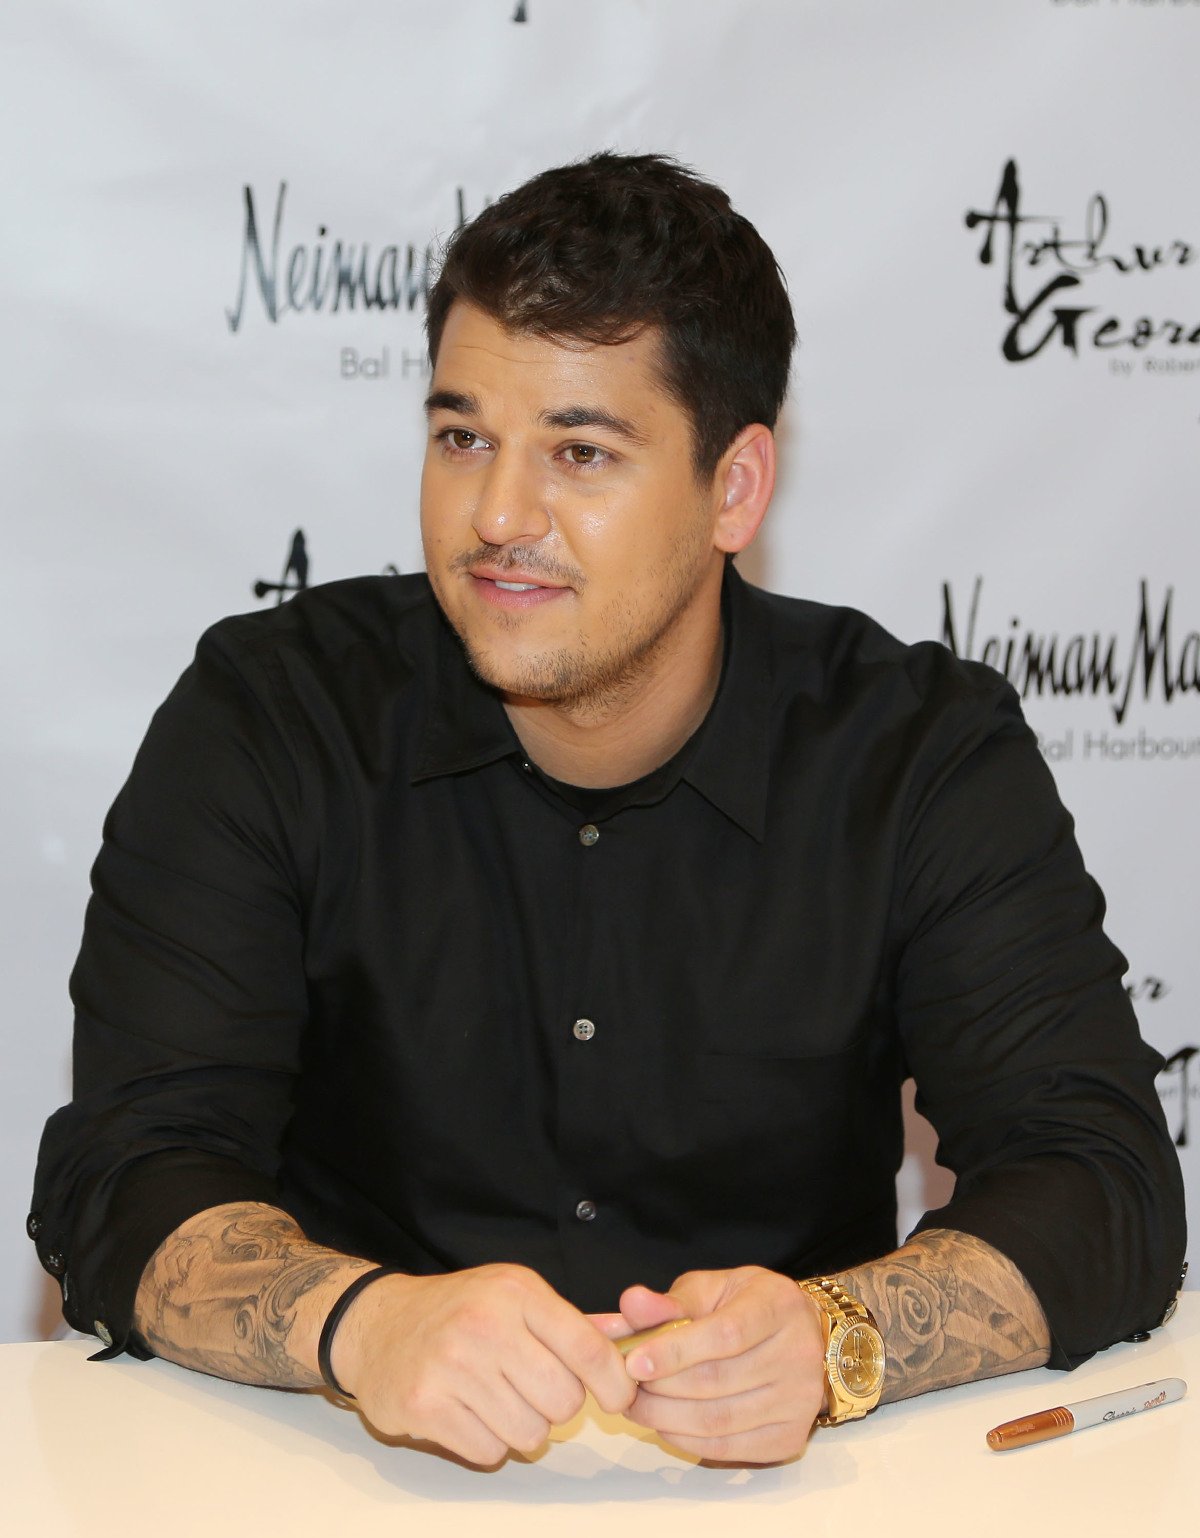 Rob Kardashian presents his Arthur George Socks Collection at Neiman Marcus Bal Harbour at Neiman Marcus on December 10, 2012 | Photo: Getty Images